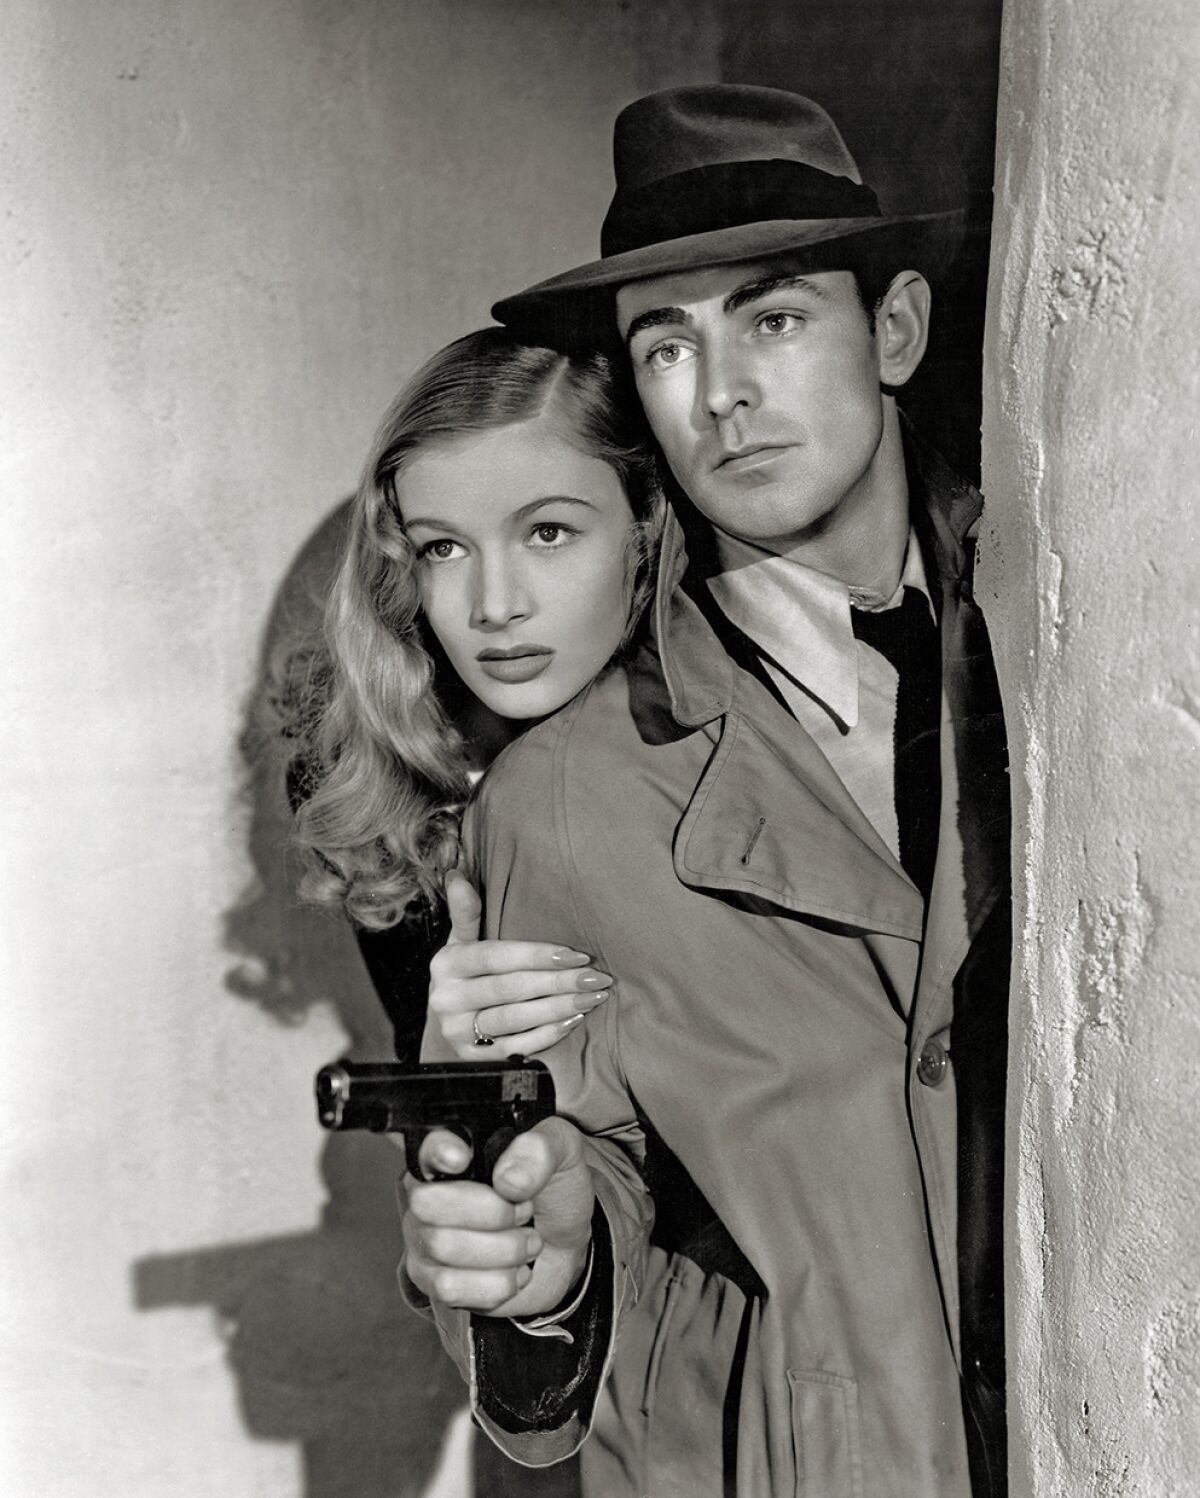 Photo from the book "Into the Dark: The Hidden World of Film Noir, 1941-1950." Veronica Lake and Alan Ladd in "This Gun for Hire." (Into the Dark / Running Press / TCM)